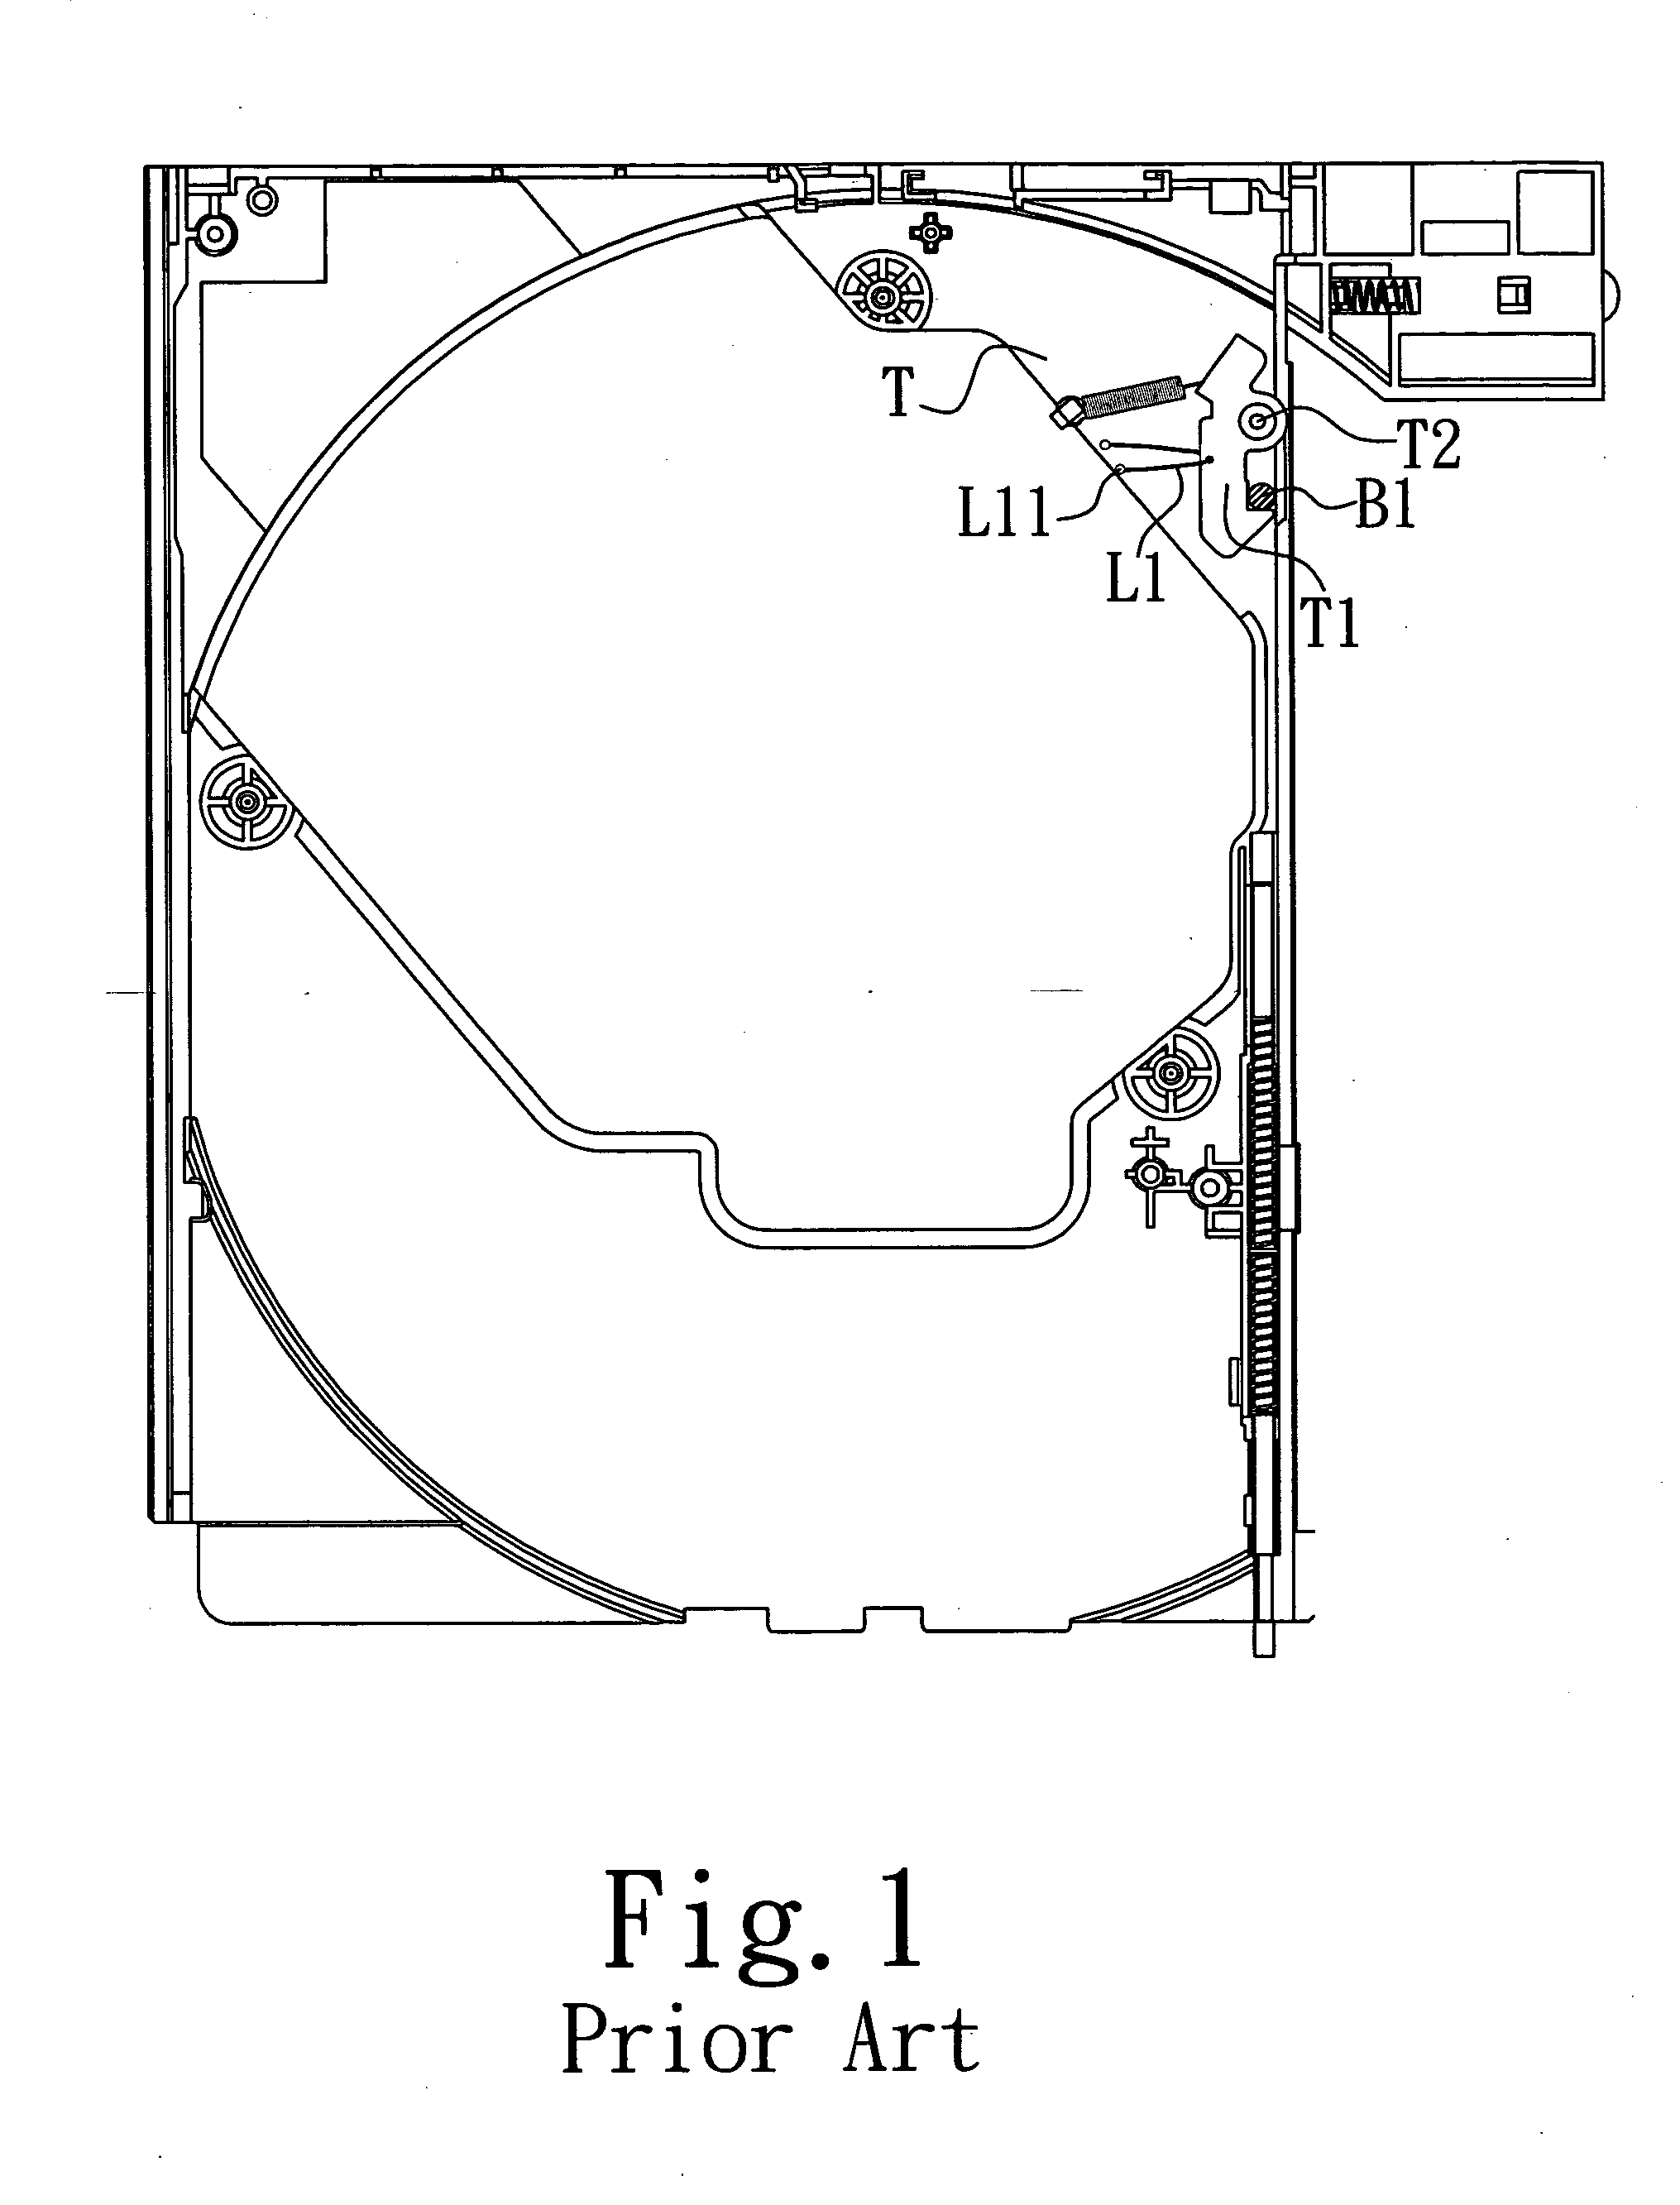 Tray locking device for optical disc drive